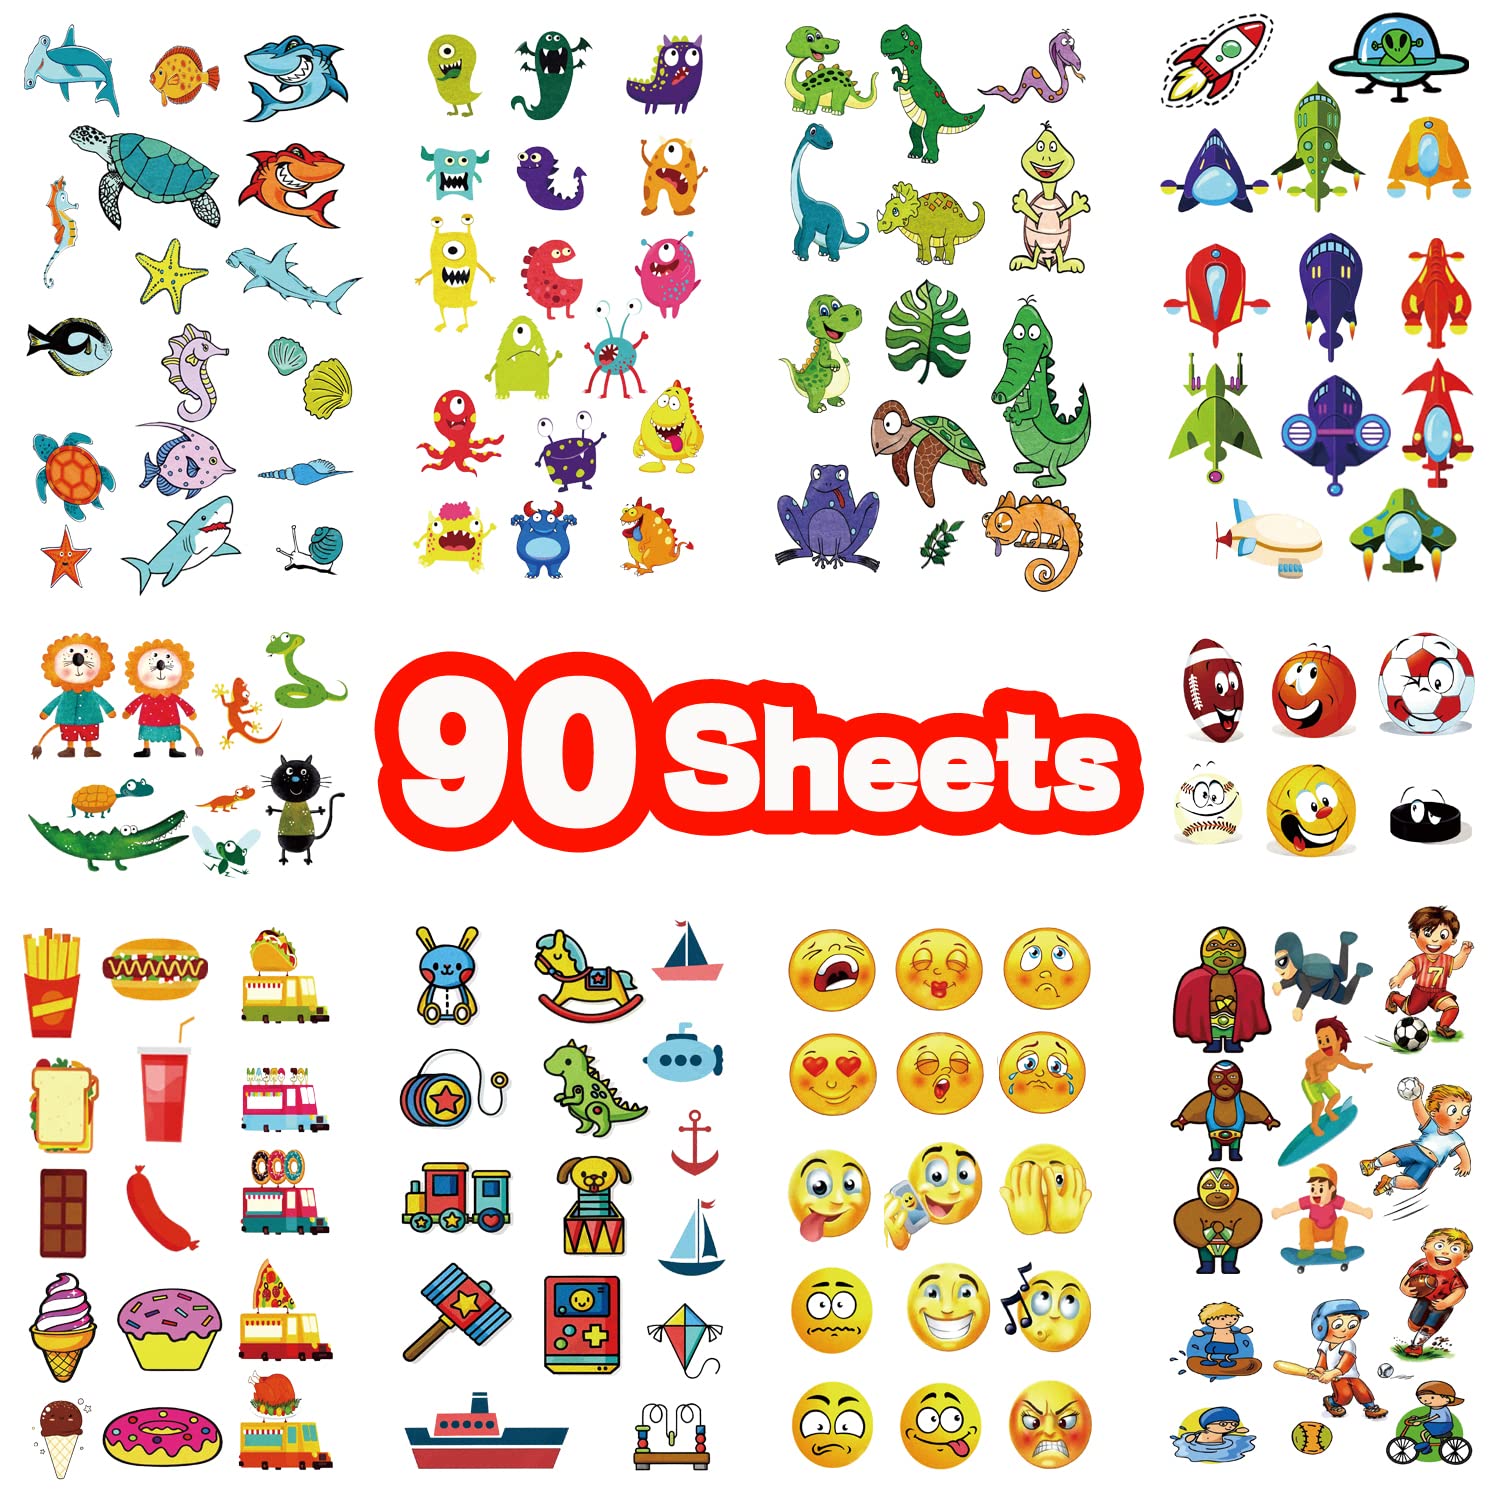 90 Sheets Temporary Tattoos for Kids Boys Girls Adults Great Party Favors and Decorations 